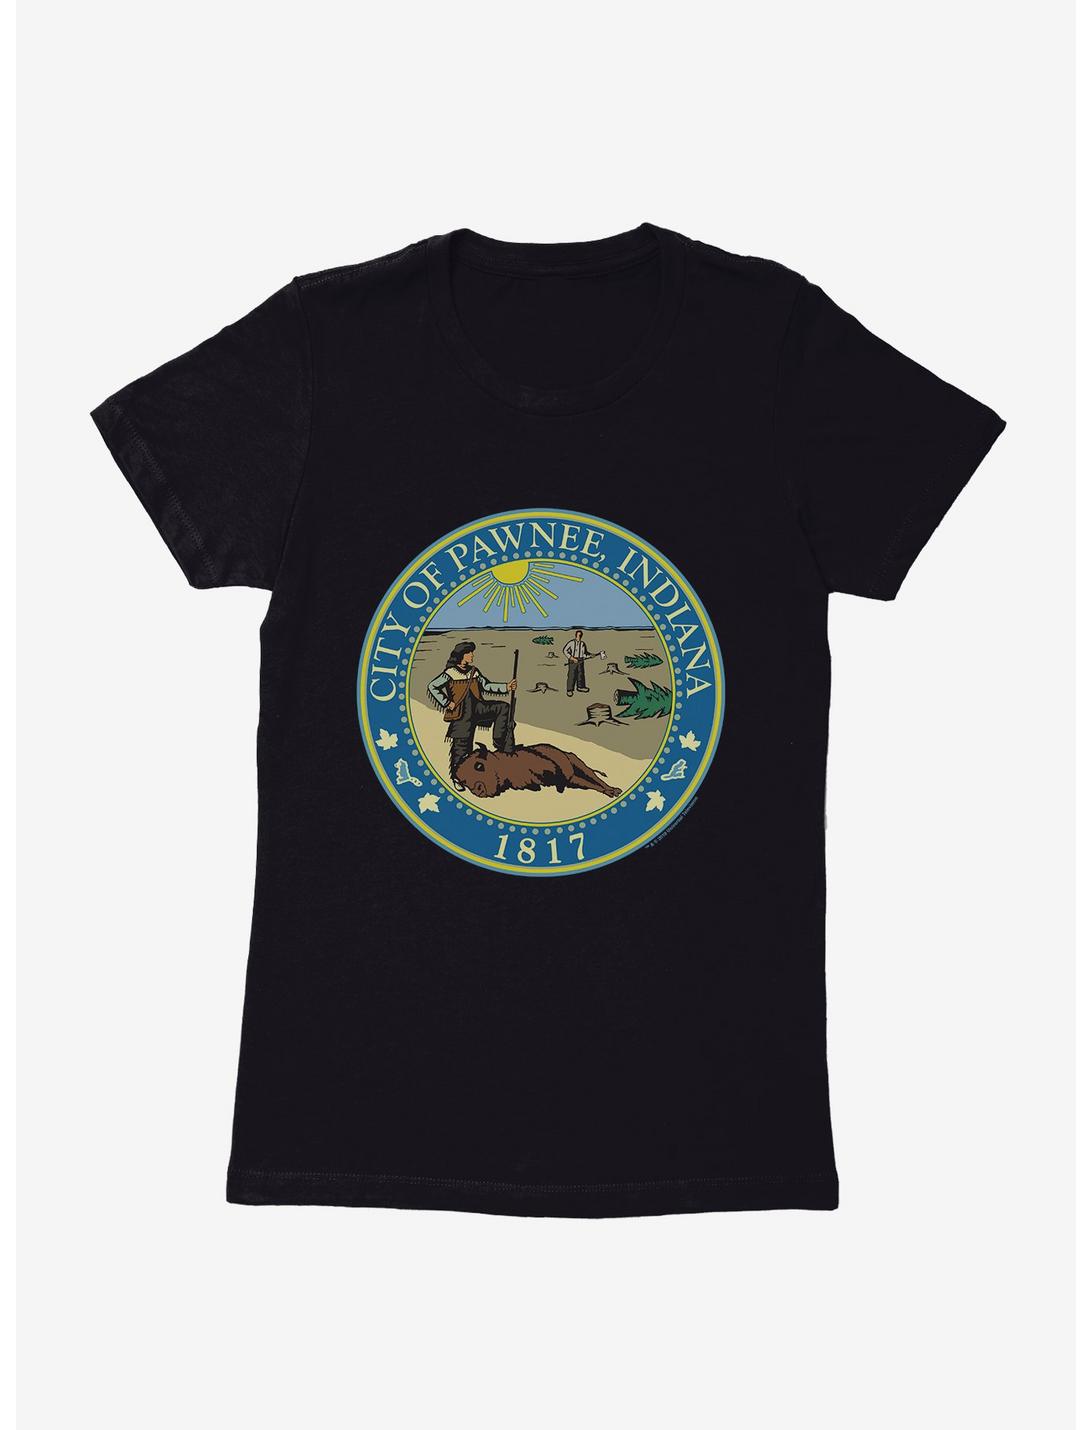 Parks And Recreation Pawnee Indiana Seal Womens T-Shirt, , hi-res